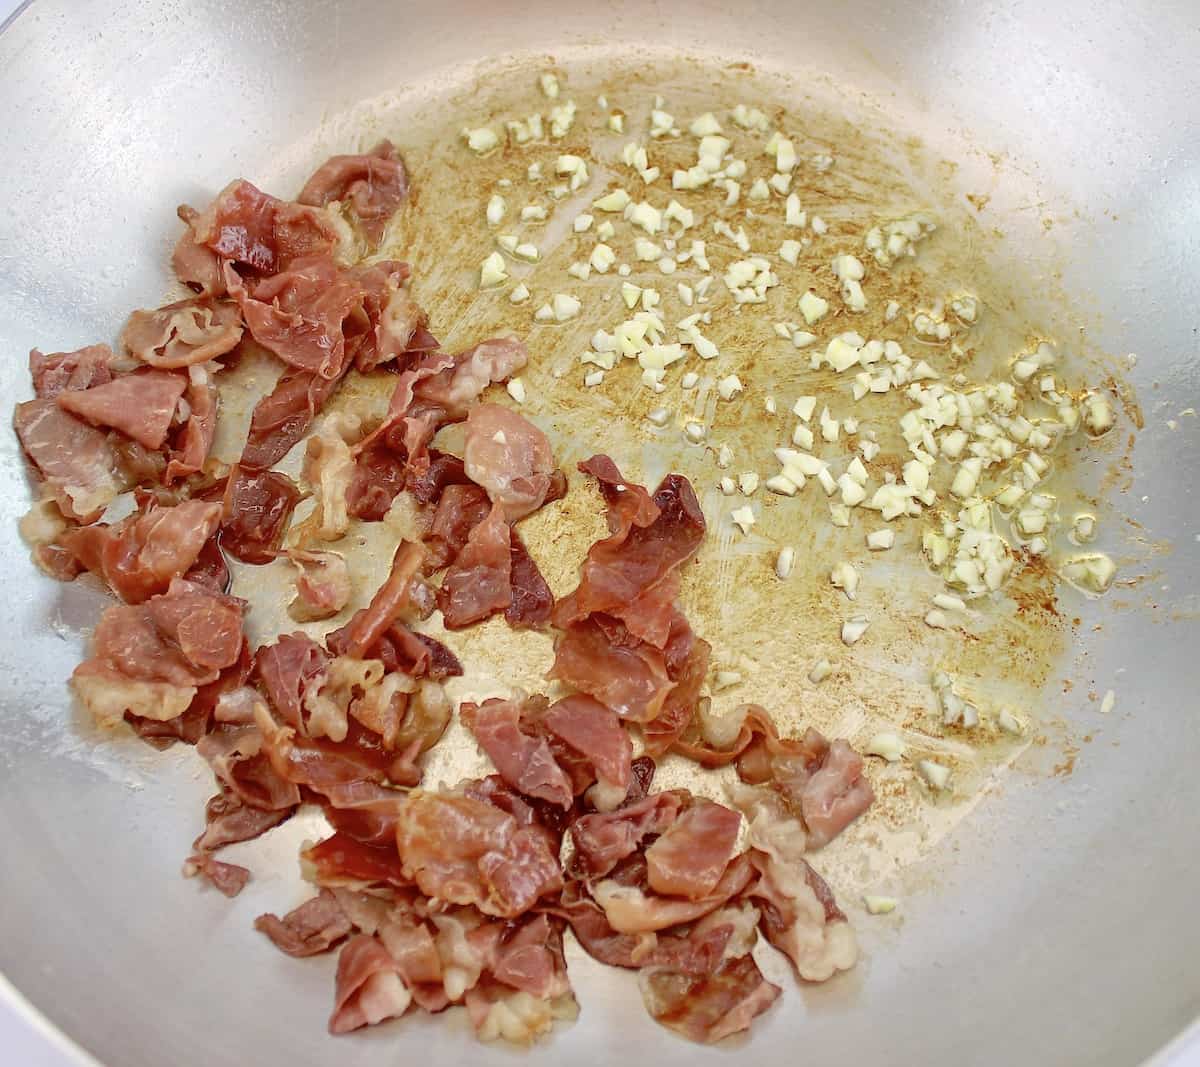 prosciutto being sauteed in skillet